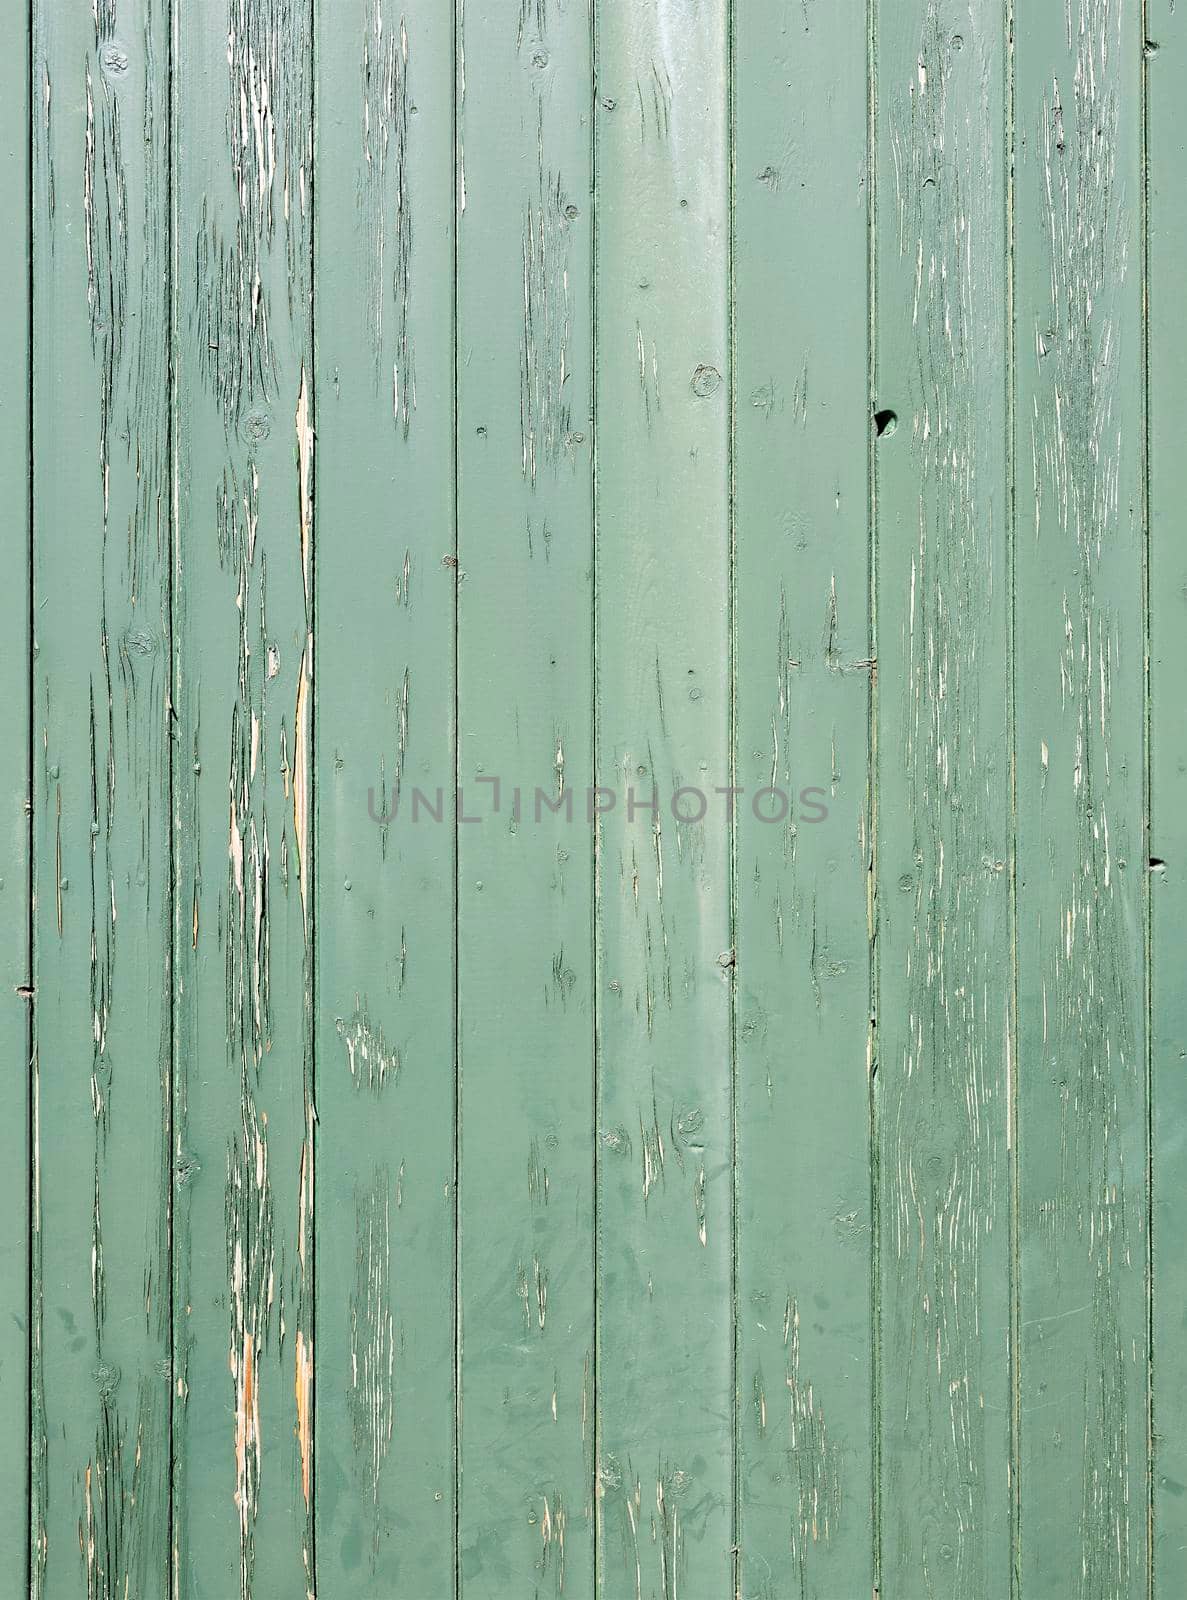 weathered green pant on vertical part of board from old wooden planks